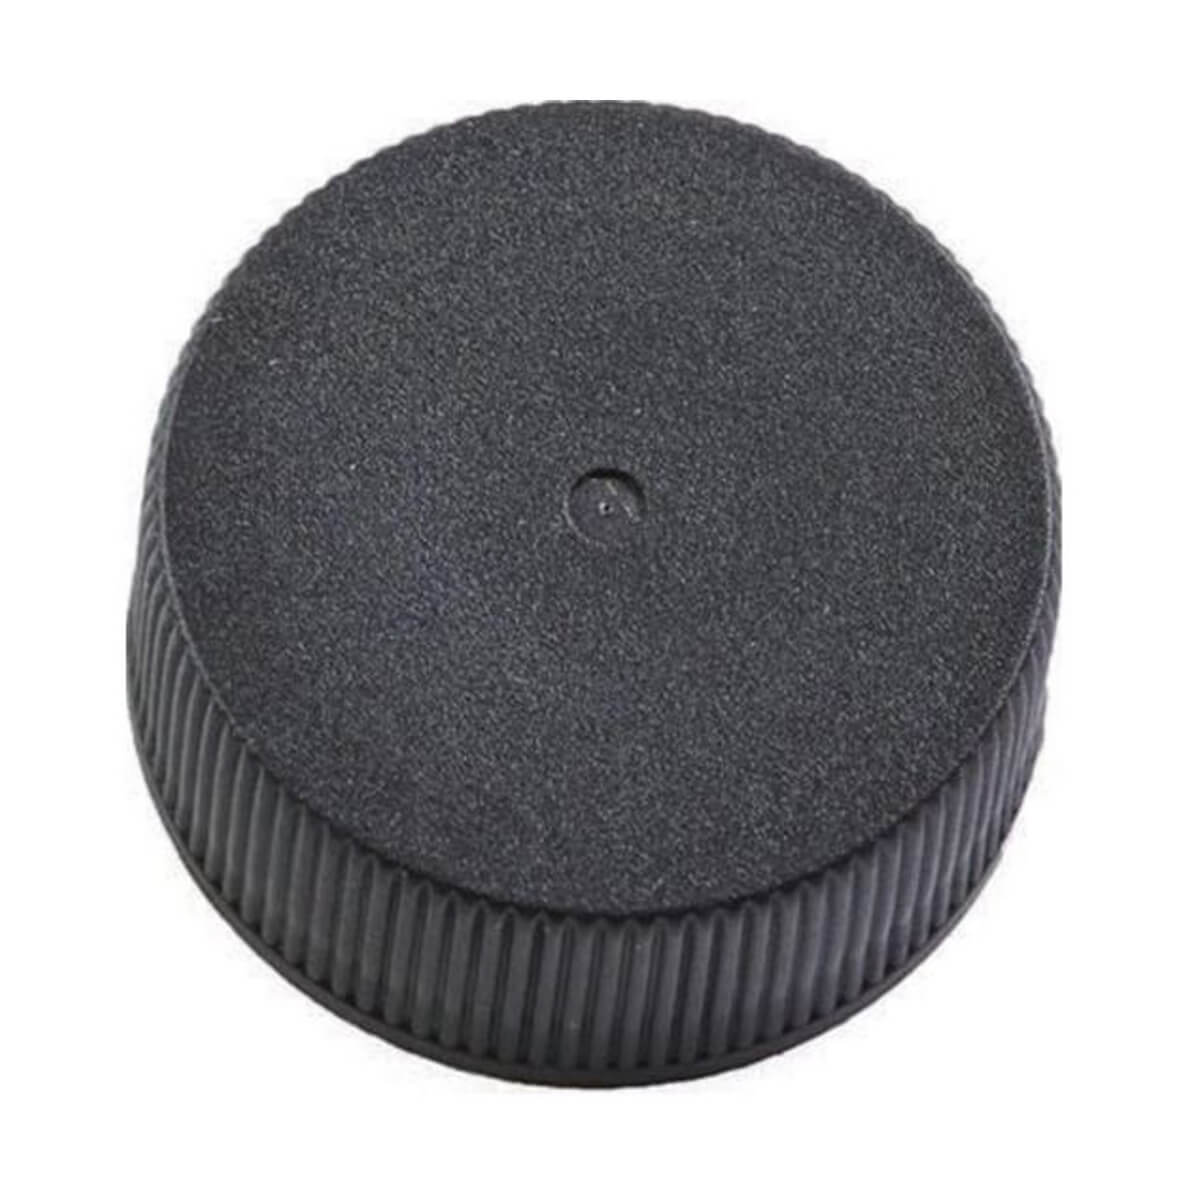 Little Giant Replacement Cap for Poultry Waterer - Black